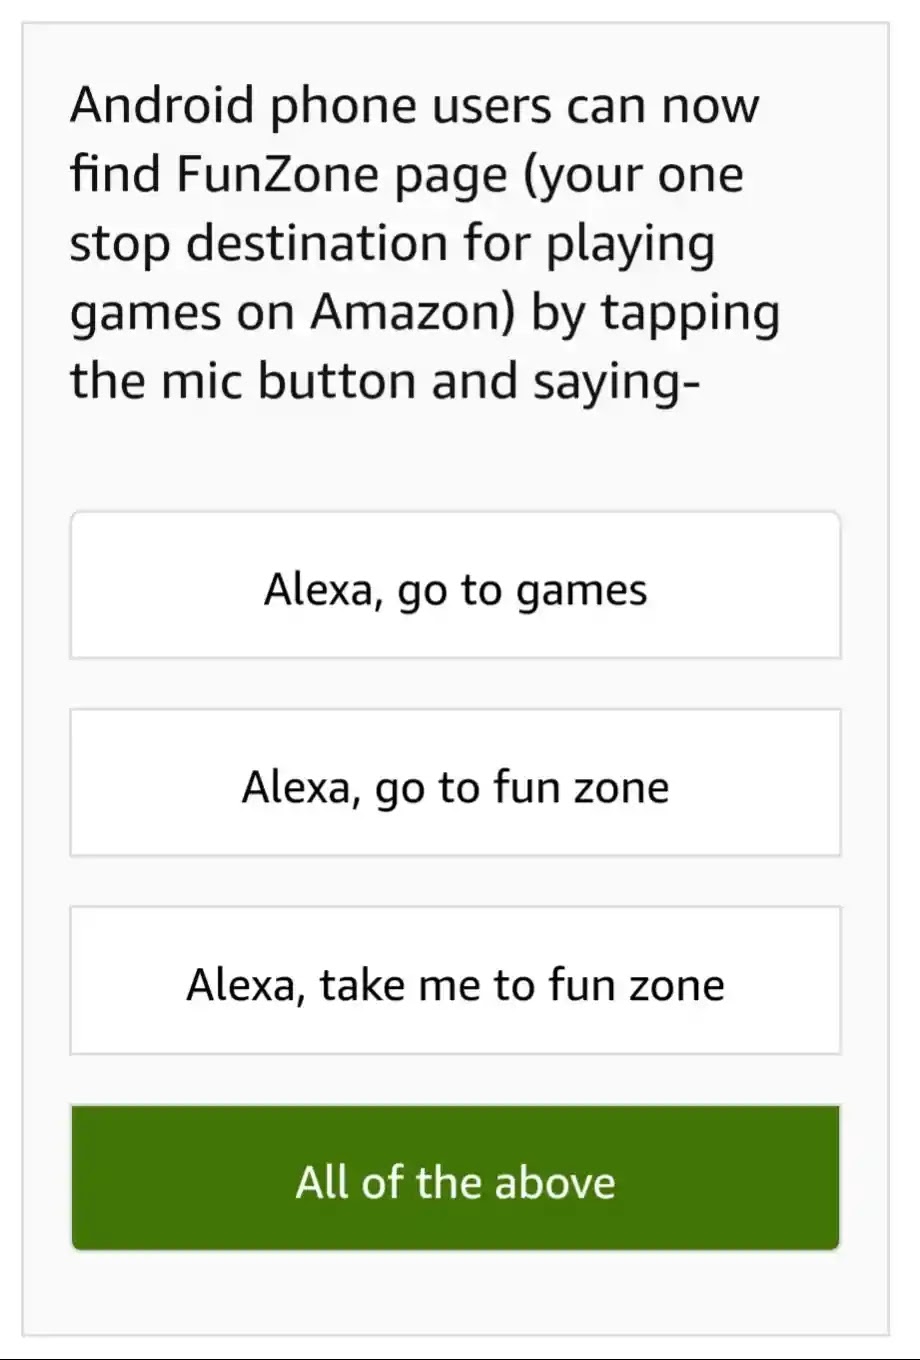 Android phone users can now find FunZone page (your one stop destination for playing games on Amazon) by tapping the mic button and saying-